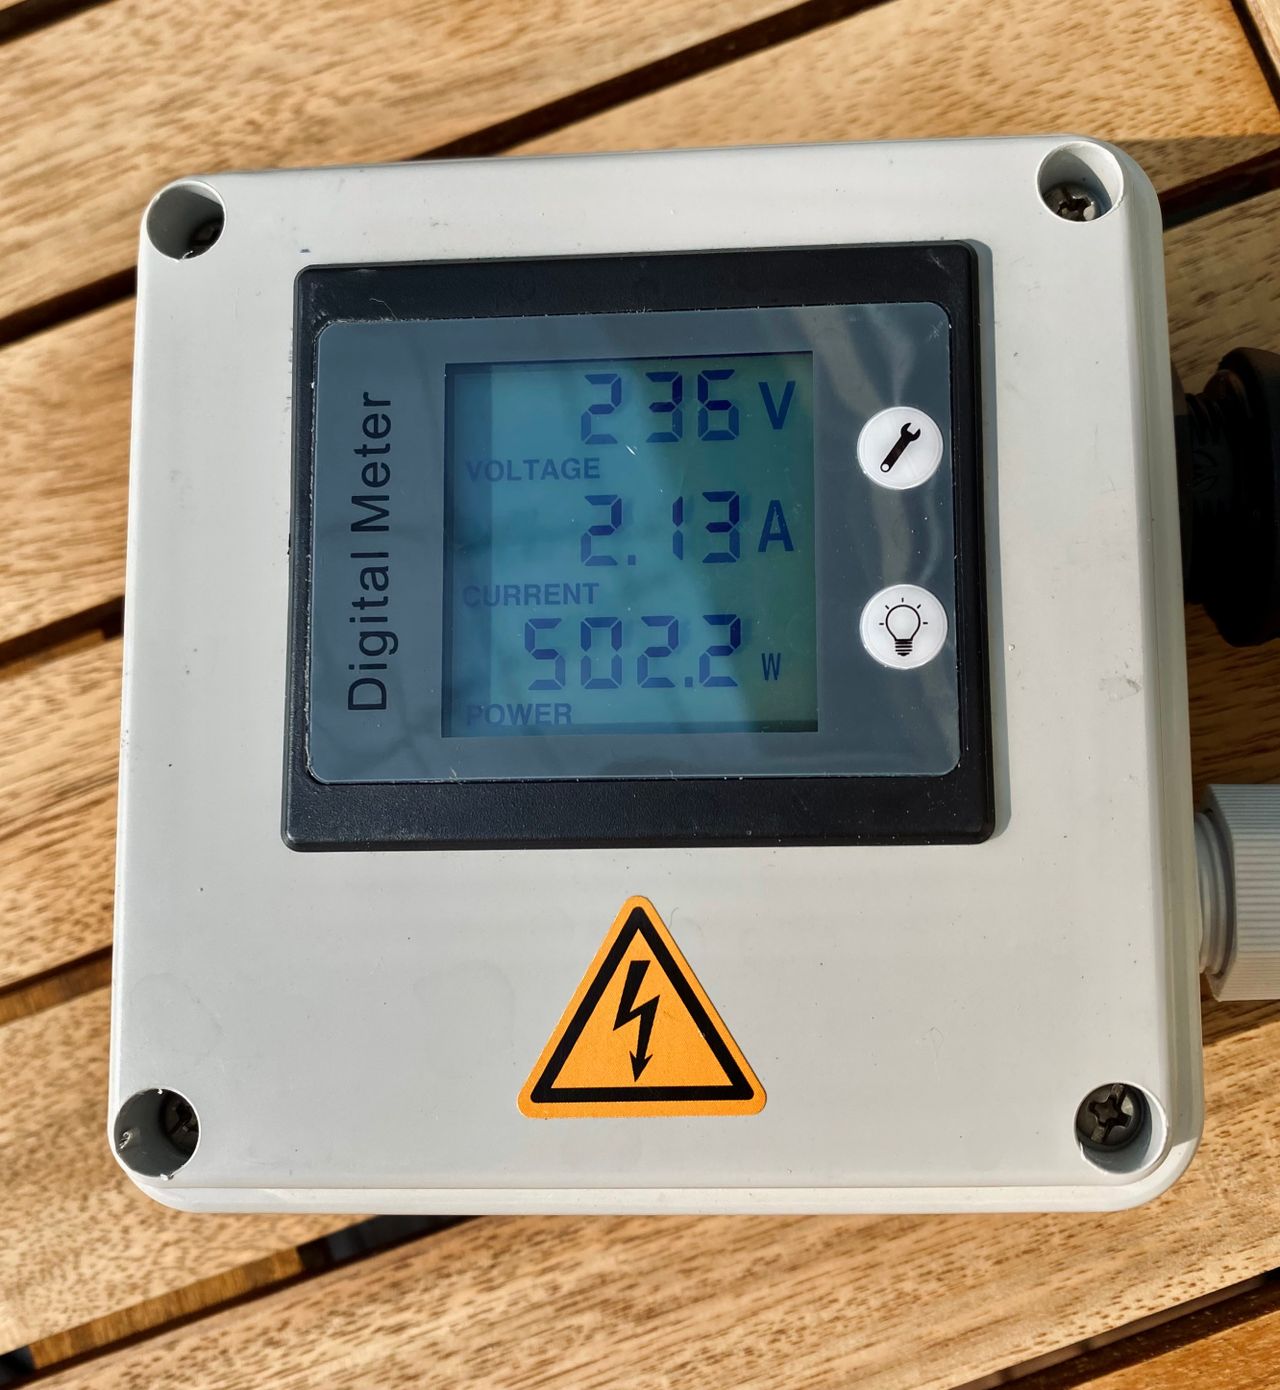 A digital meter for solar panels laying on a wooden table. The meter reads Voltage 236V, Current 2.13A, Power 502.2W